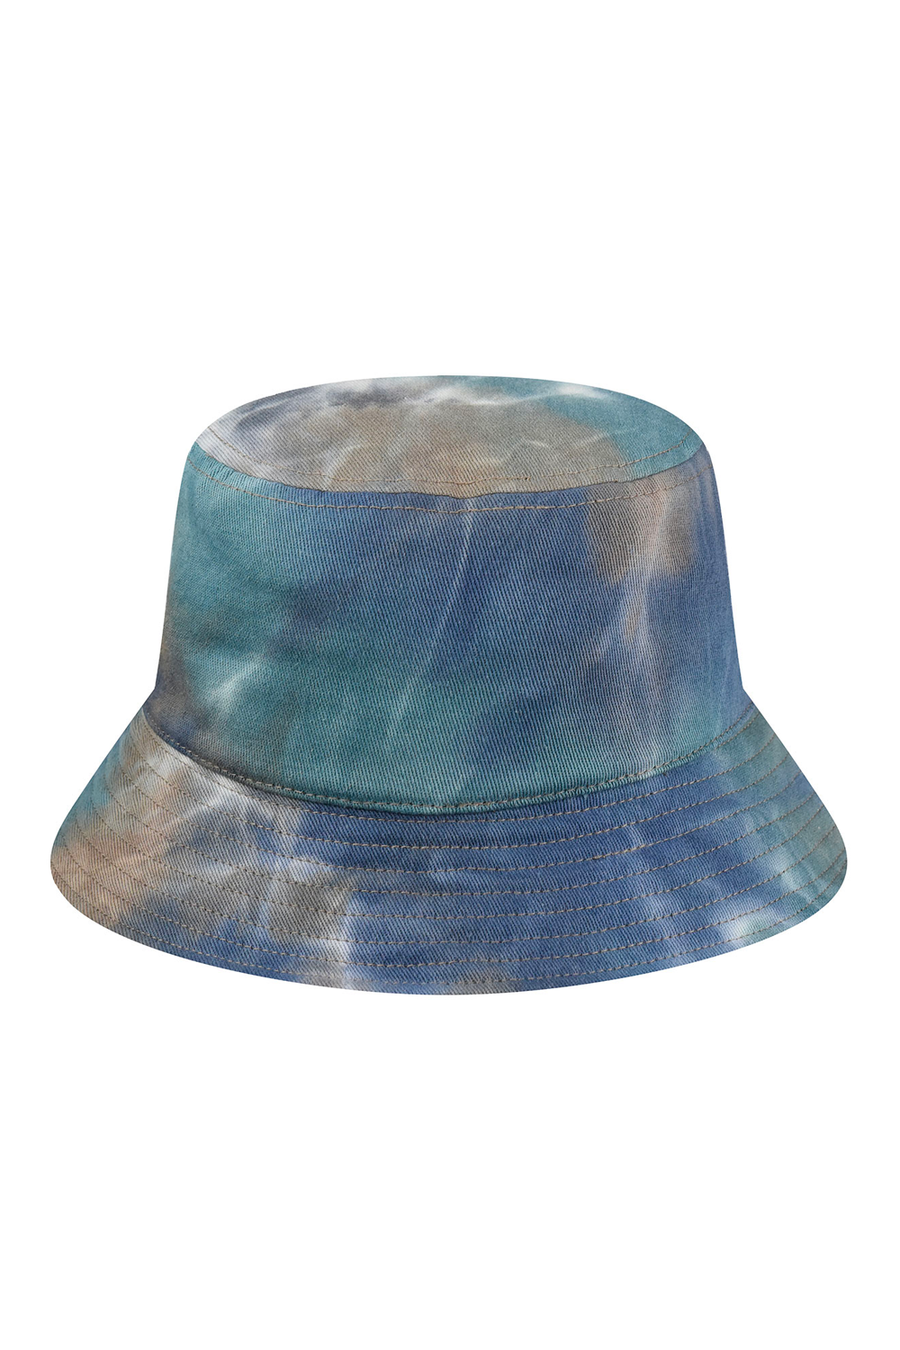 Buy the Kangol Tie Dye Bucket Hat in Earth Tone at Intro. Spend £50 for free UK delivery. Official stockists. We ship worldwide.